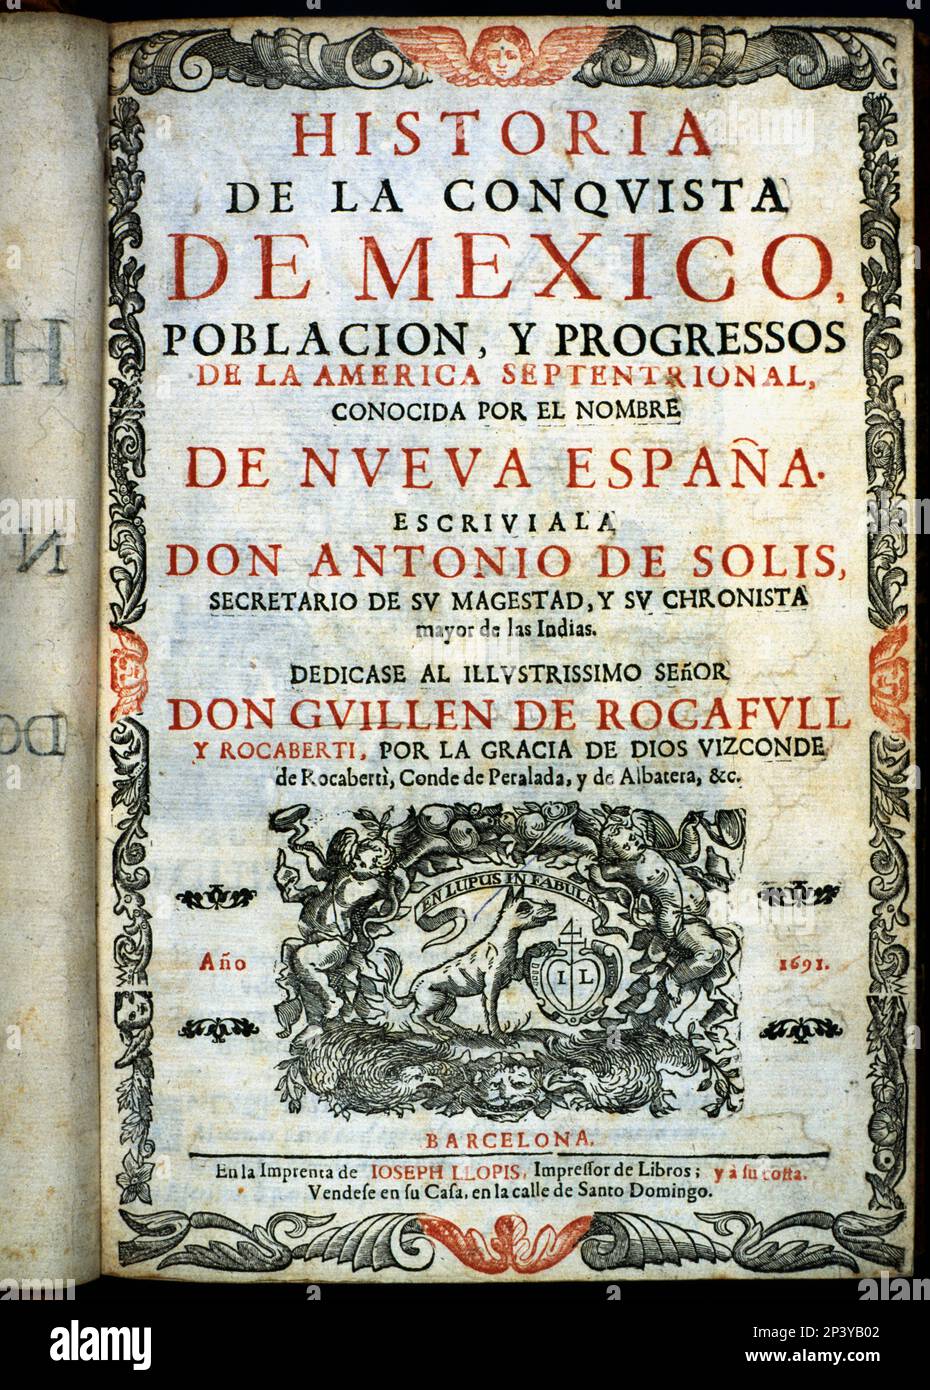 Cover of the 'History of the Conquest of Mexico', known as New Spain. Printed in Barcelona by Joseph Llopis in 1691. Stock Photo